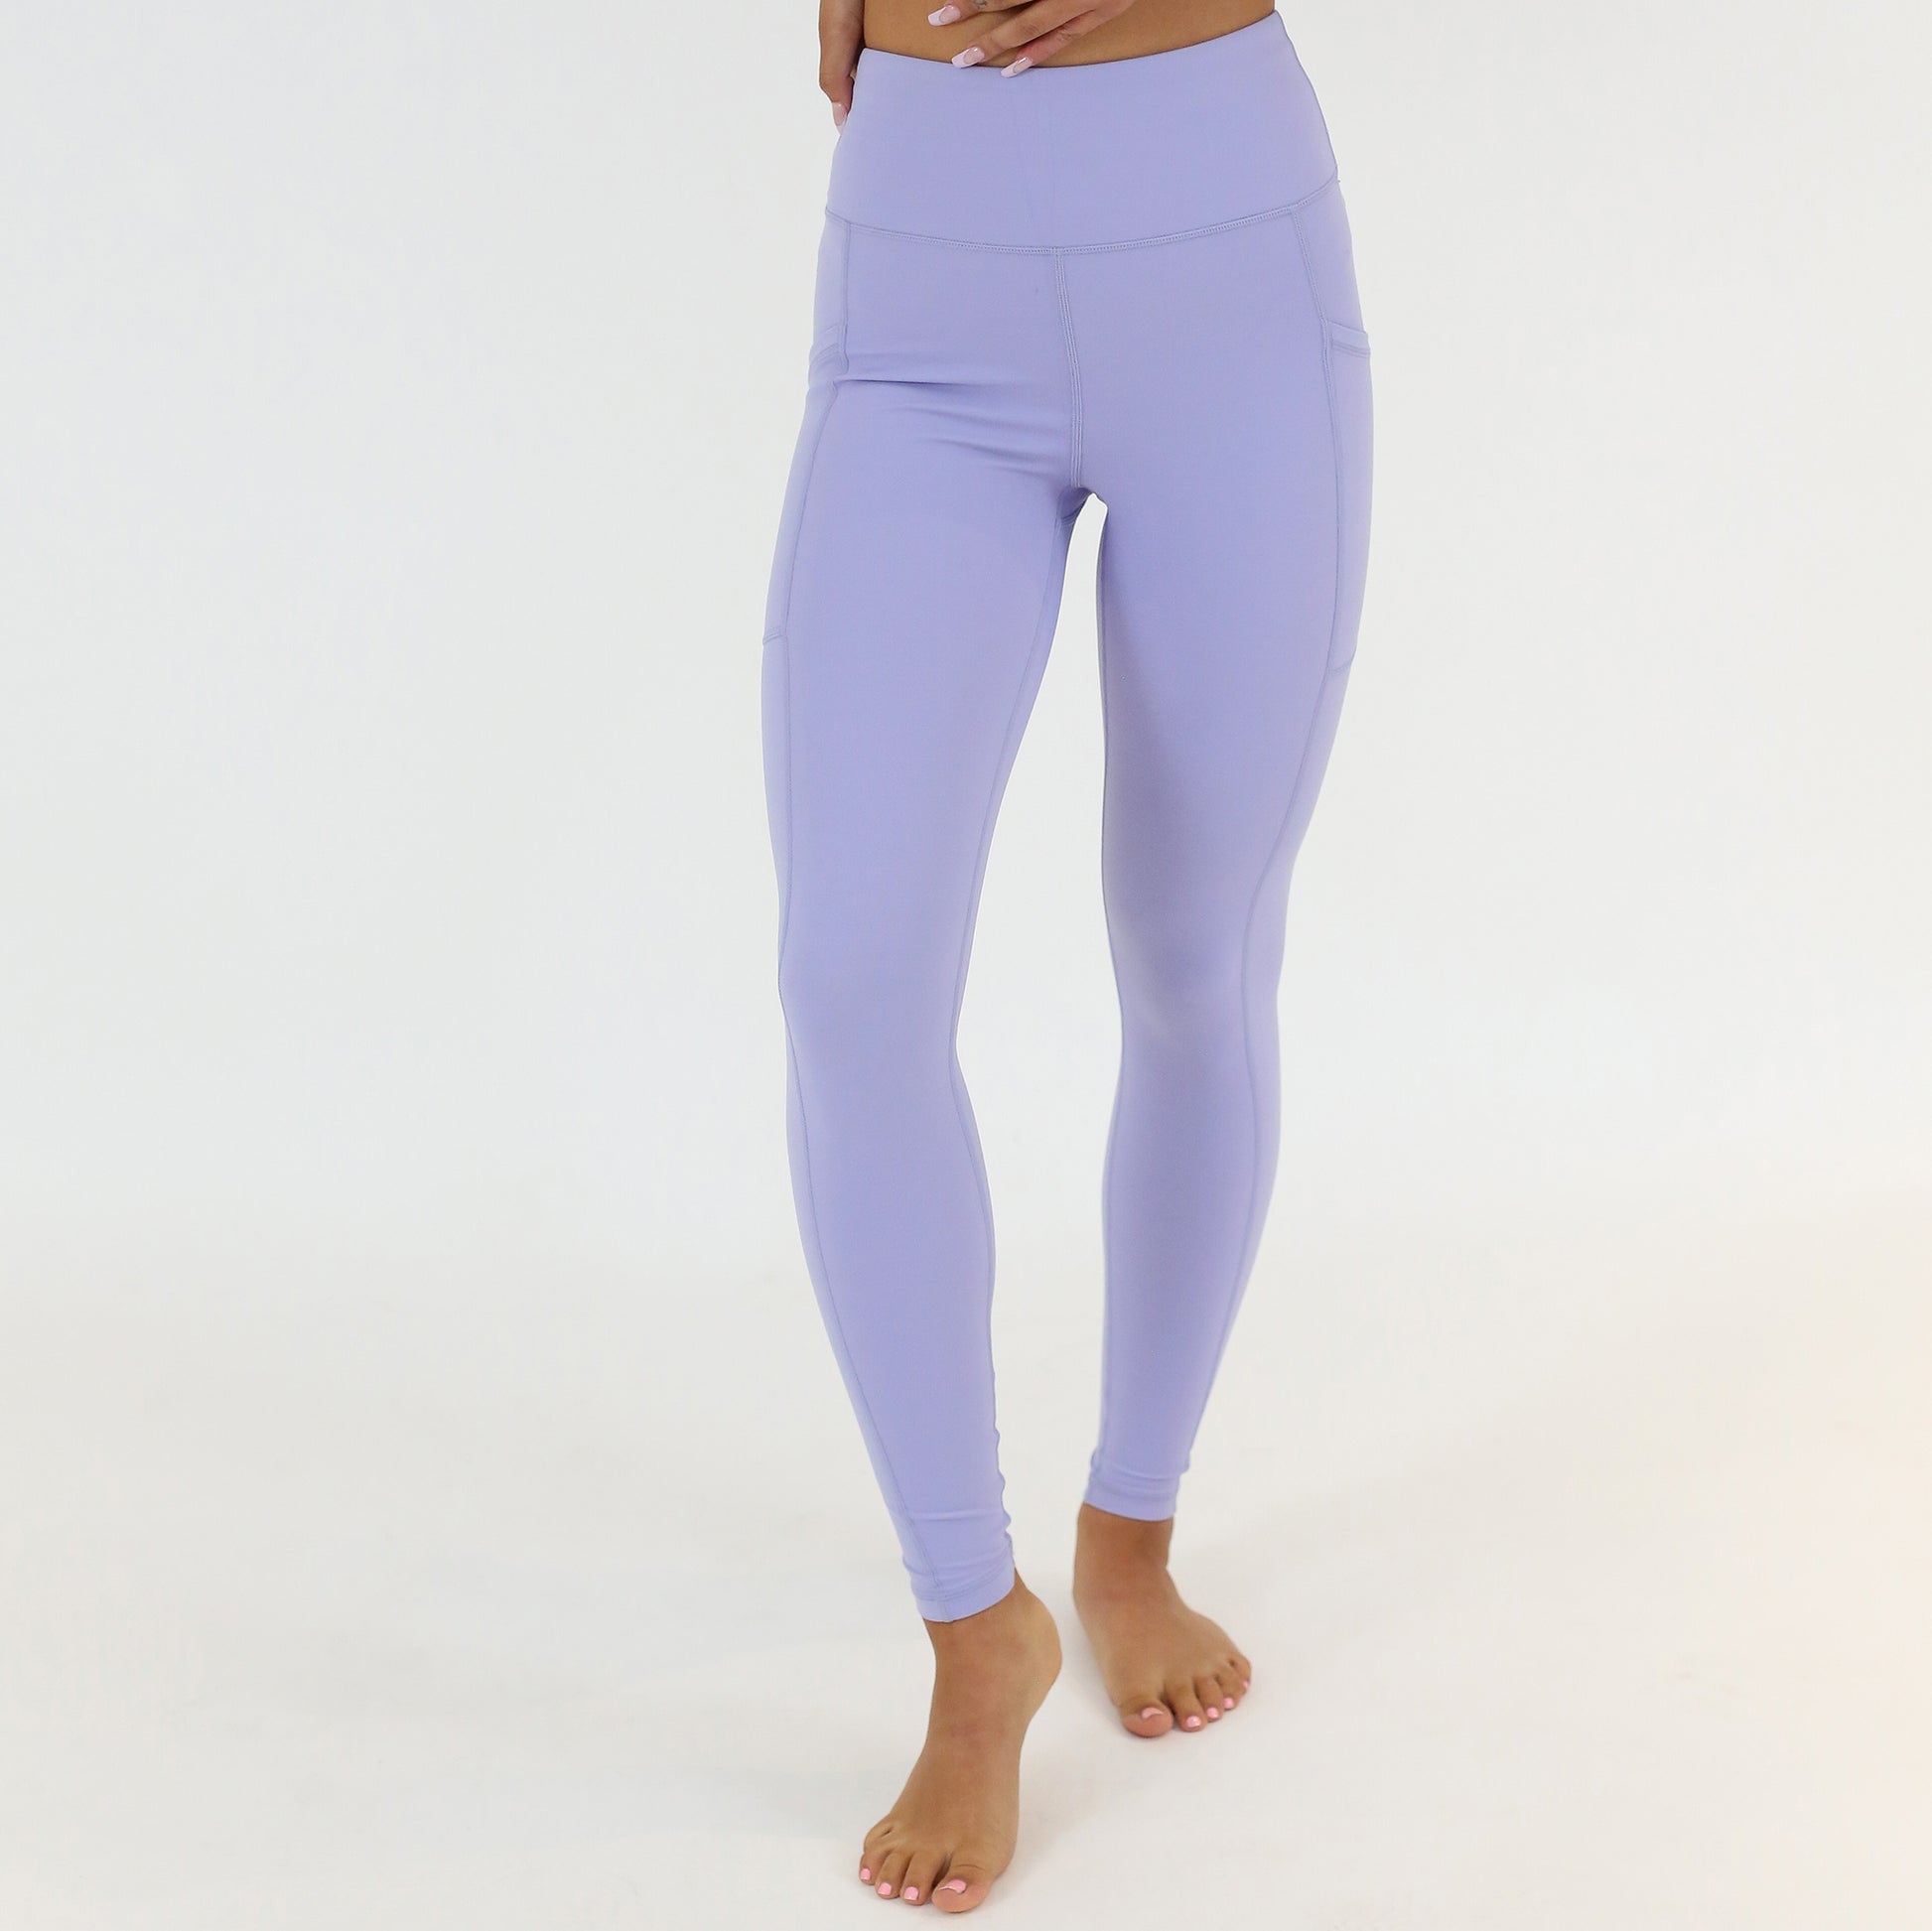 Free people FP movement yoga 7/8 leggings high rise waist ribbed leggings  lilac purple sweet pastel sports compression ruffle me up, Women's Fashion,  New Undergarments & Loungewear on Carousell